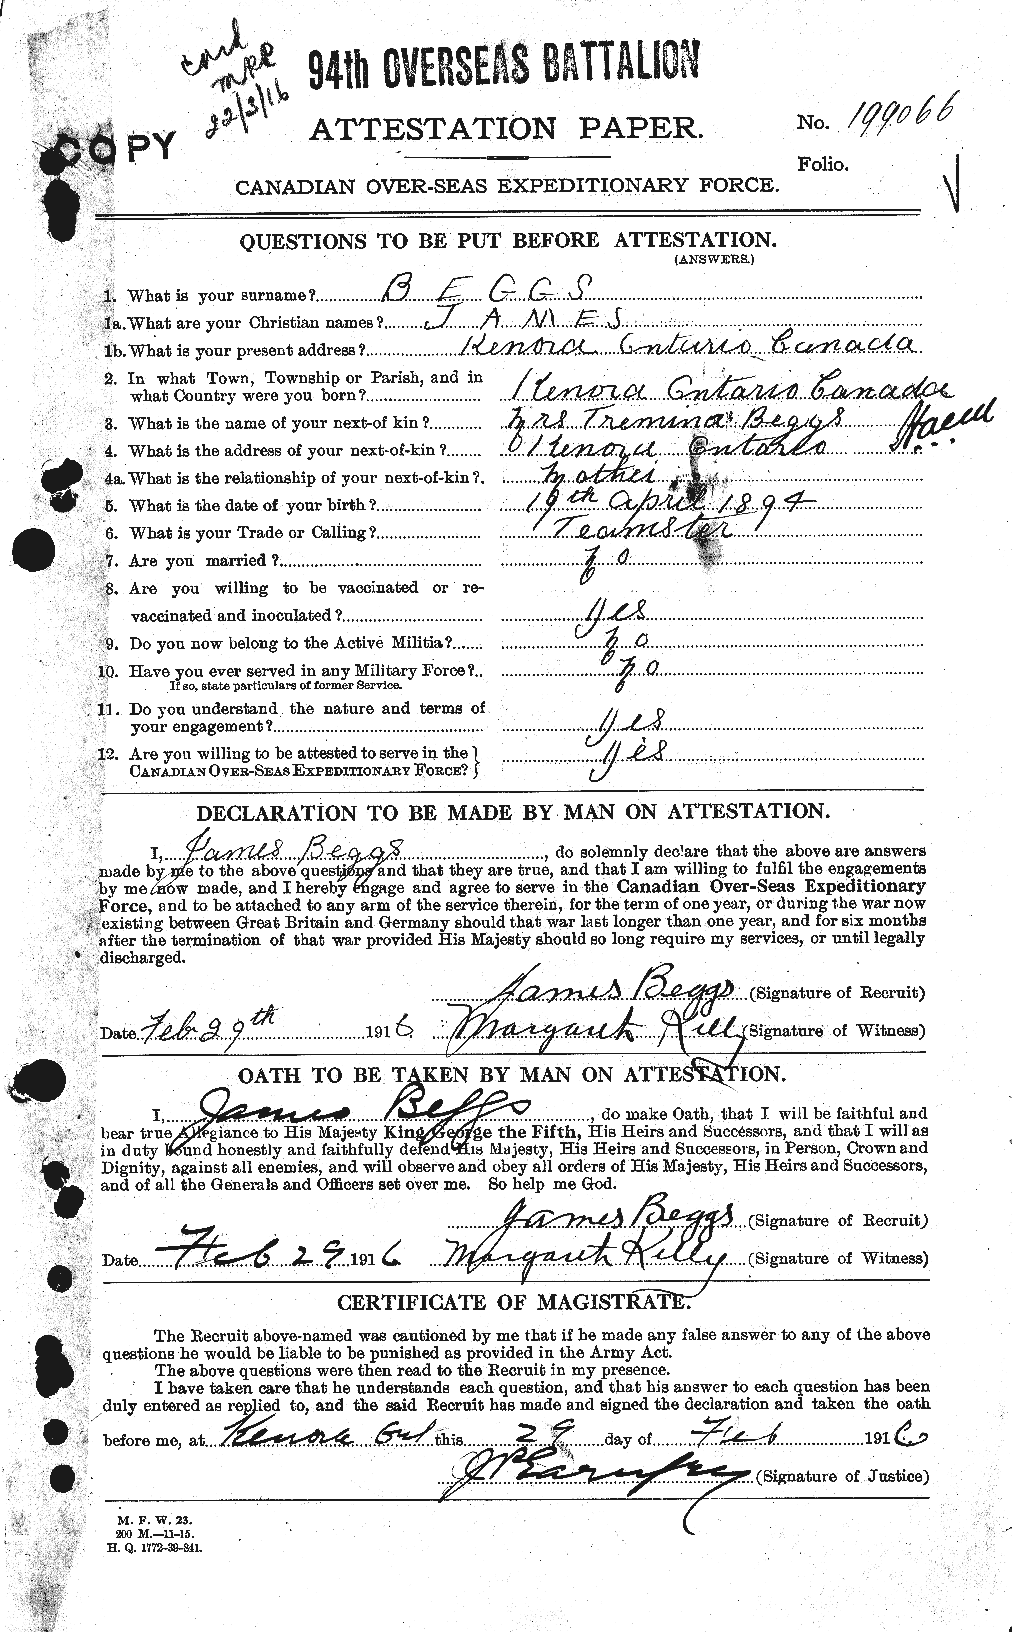 Personnel Records of the First World War - CEF 232383a